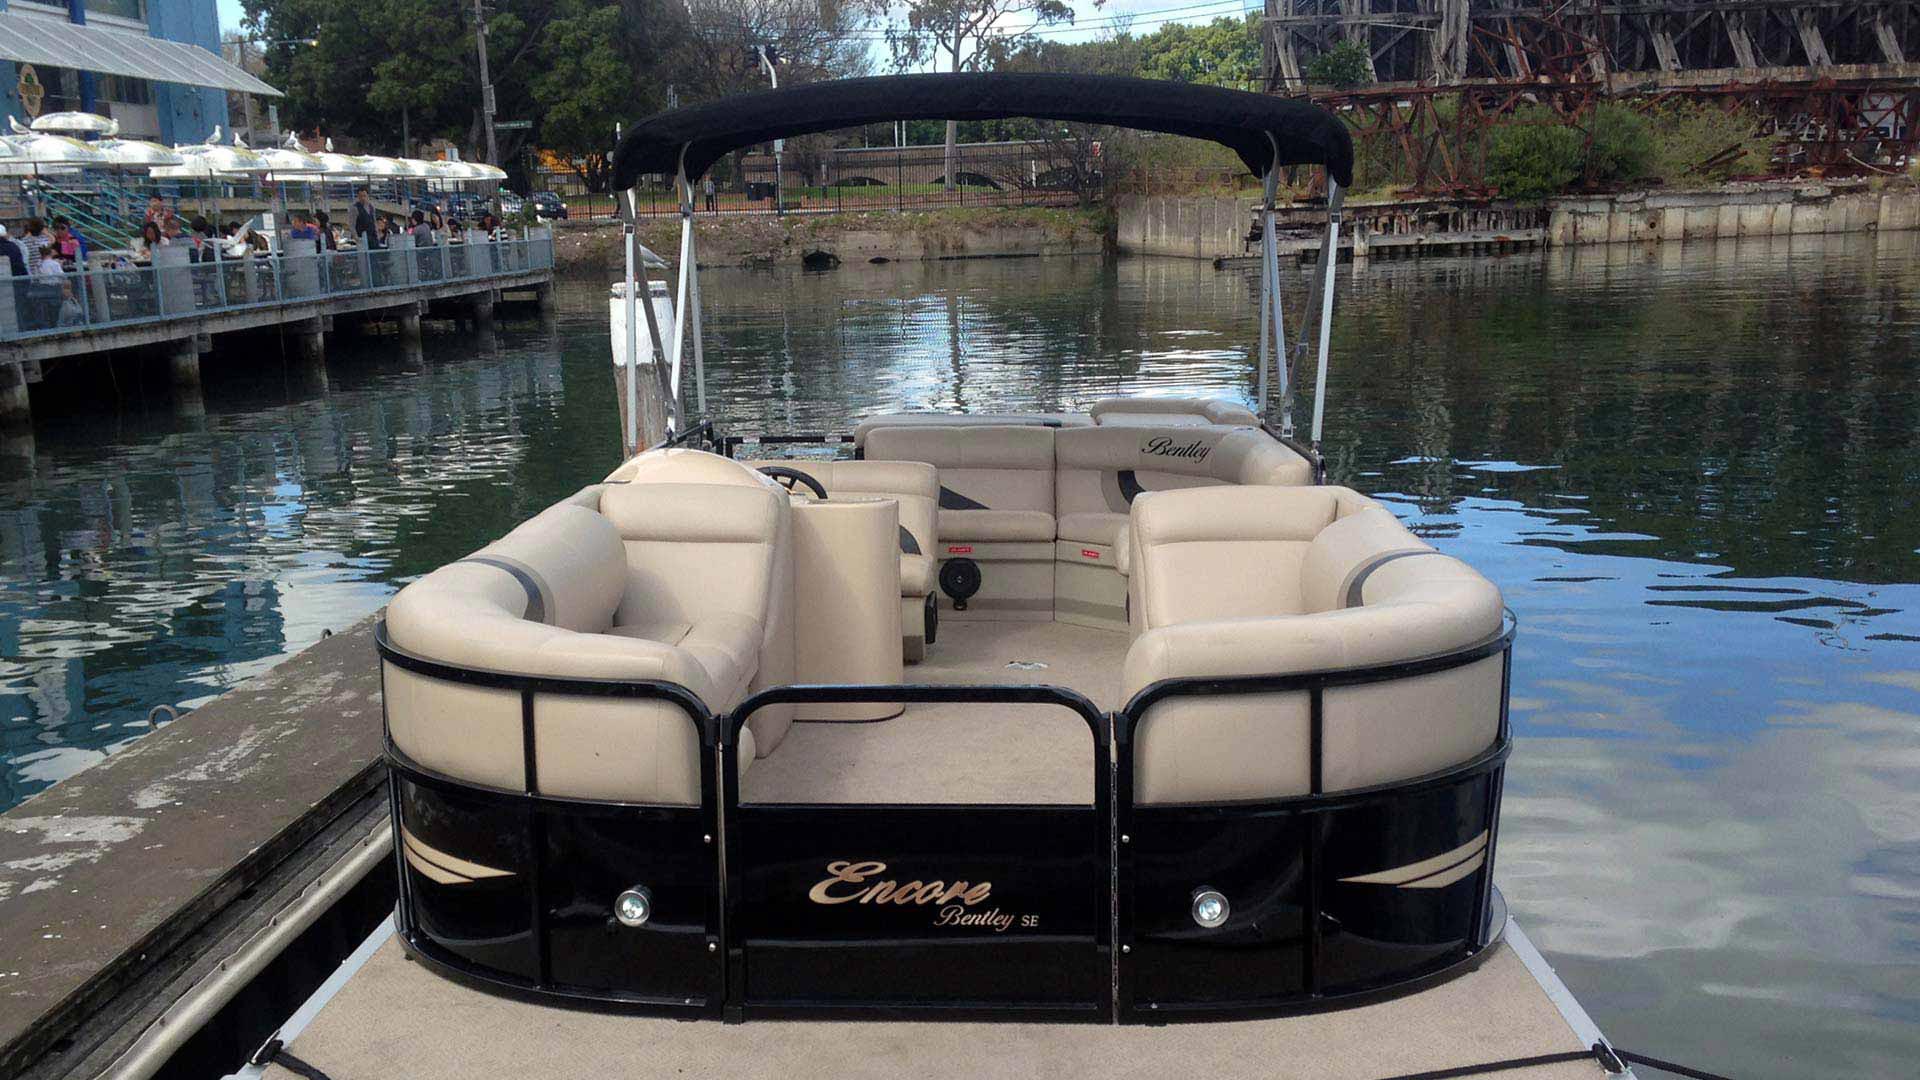 View the Sydney Opera House, Harbour Bridge, Darling Harbour and Cockatoo Island in style on one of our true luxury boats